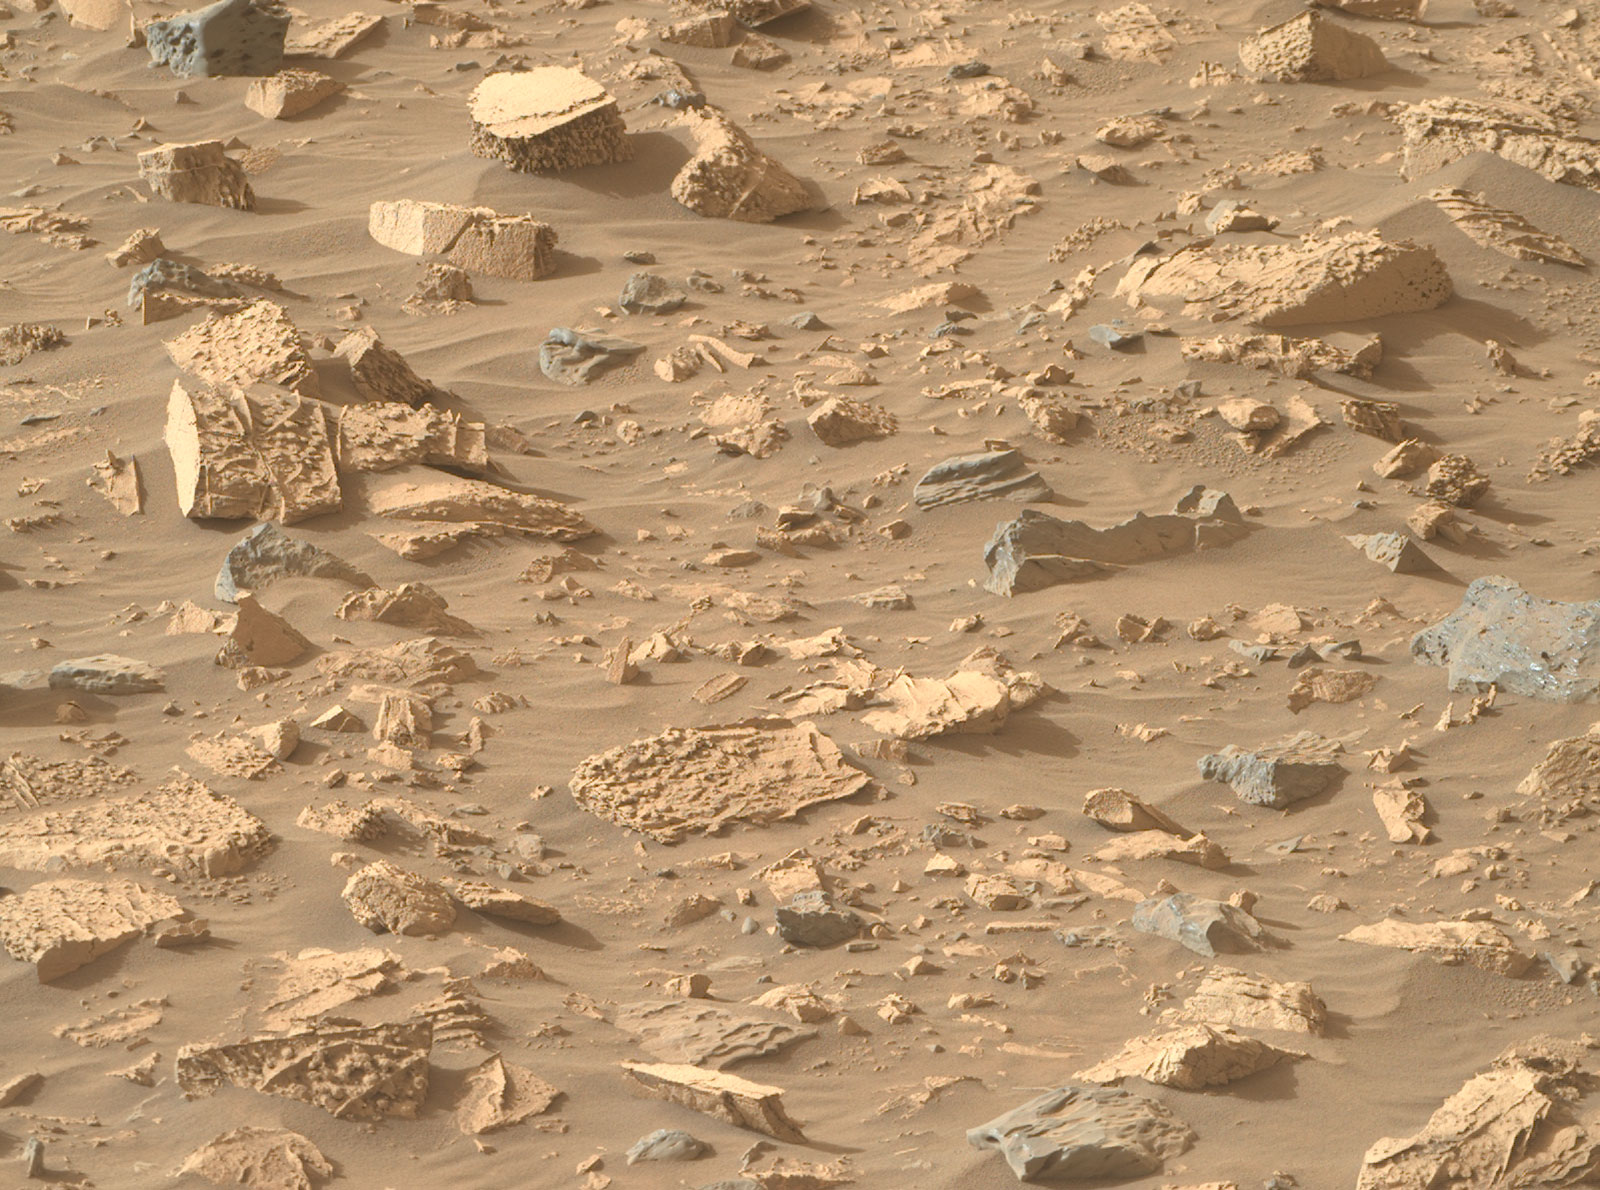 A jumbled field of light toned rocks with unusual ‘popcorn’-like textures and abundant mineral veins.